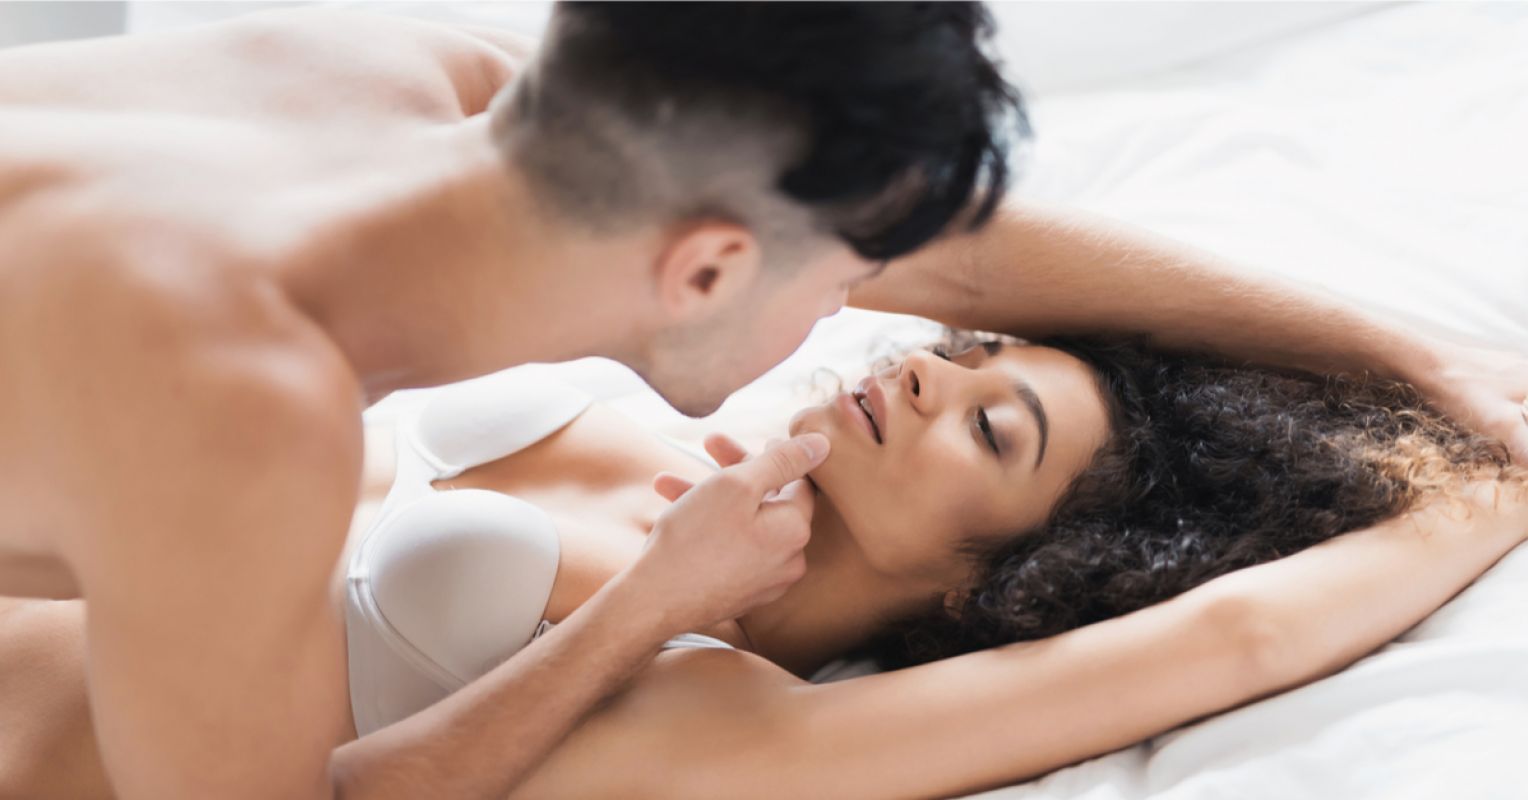 5 Key New Findings About the Female Orgasm Psychology Today image